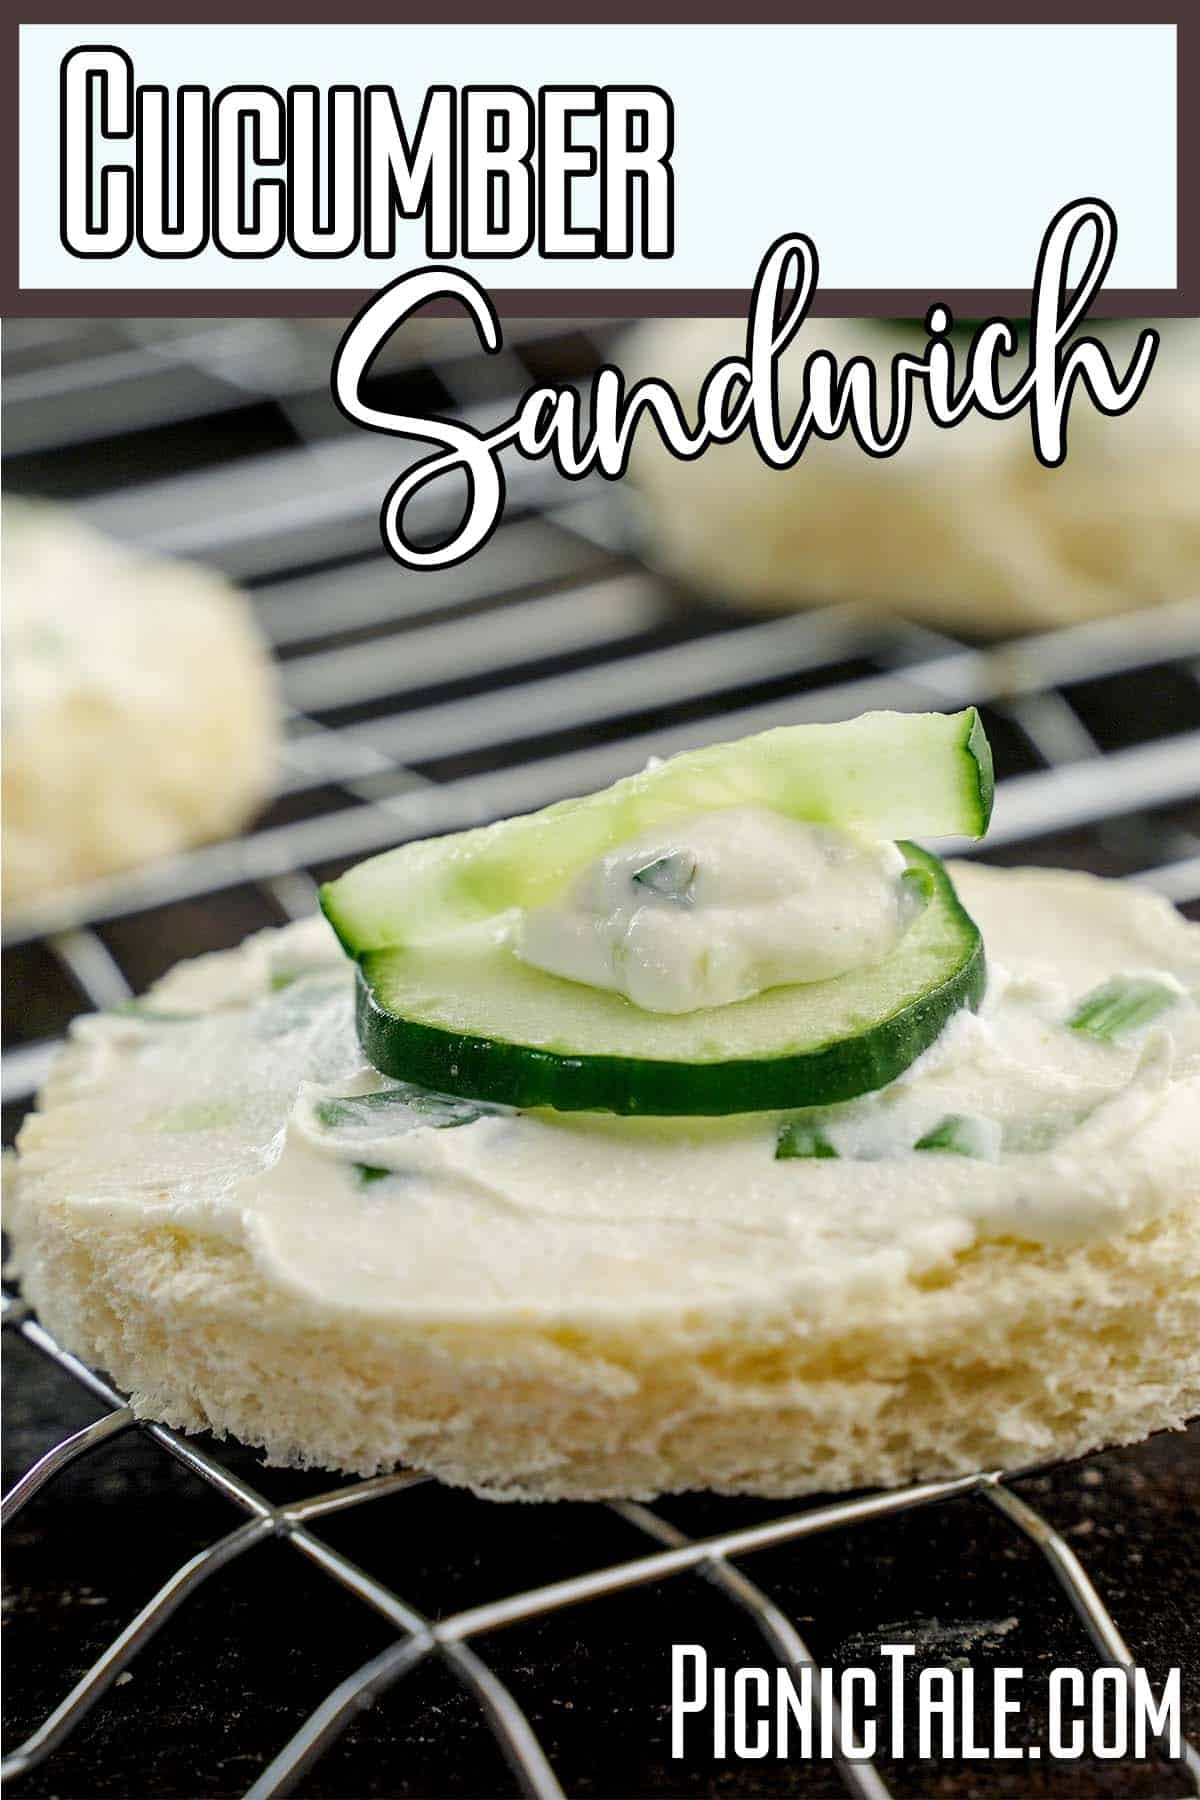 Cucumber Sandwiches, wording on top.